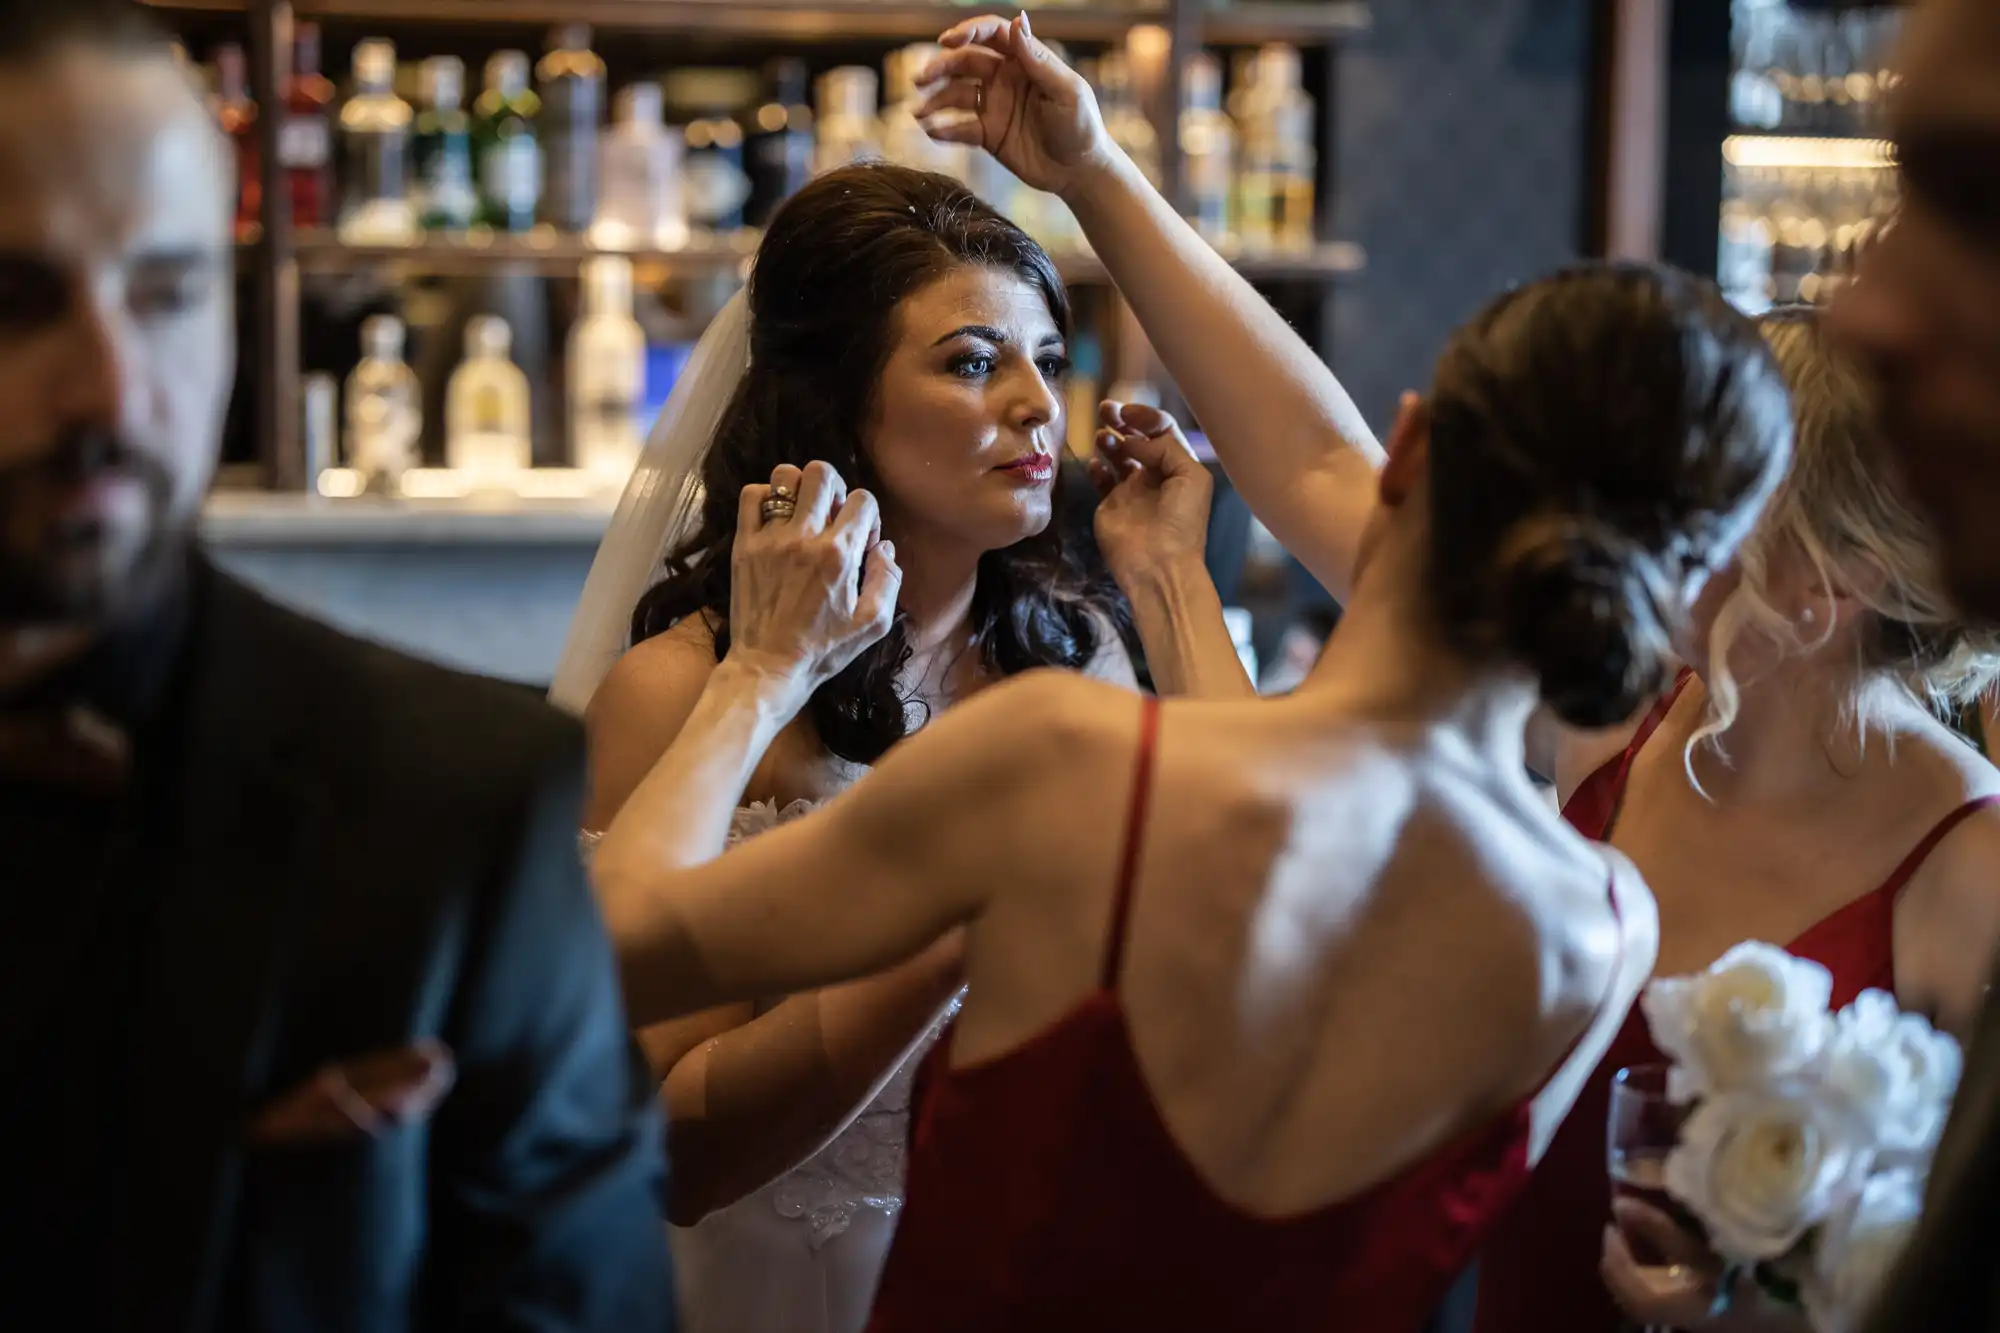 A bride is getting her makeup retouched by a woman in a red dress. Two other people are visible in the image; one adjusting her veil and another holding a bouquet. They are in front of shelves stocked with bottles.